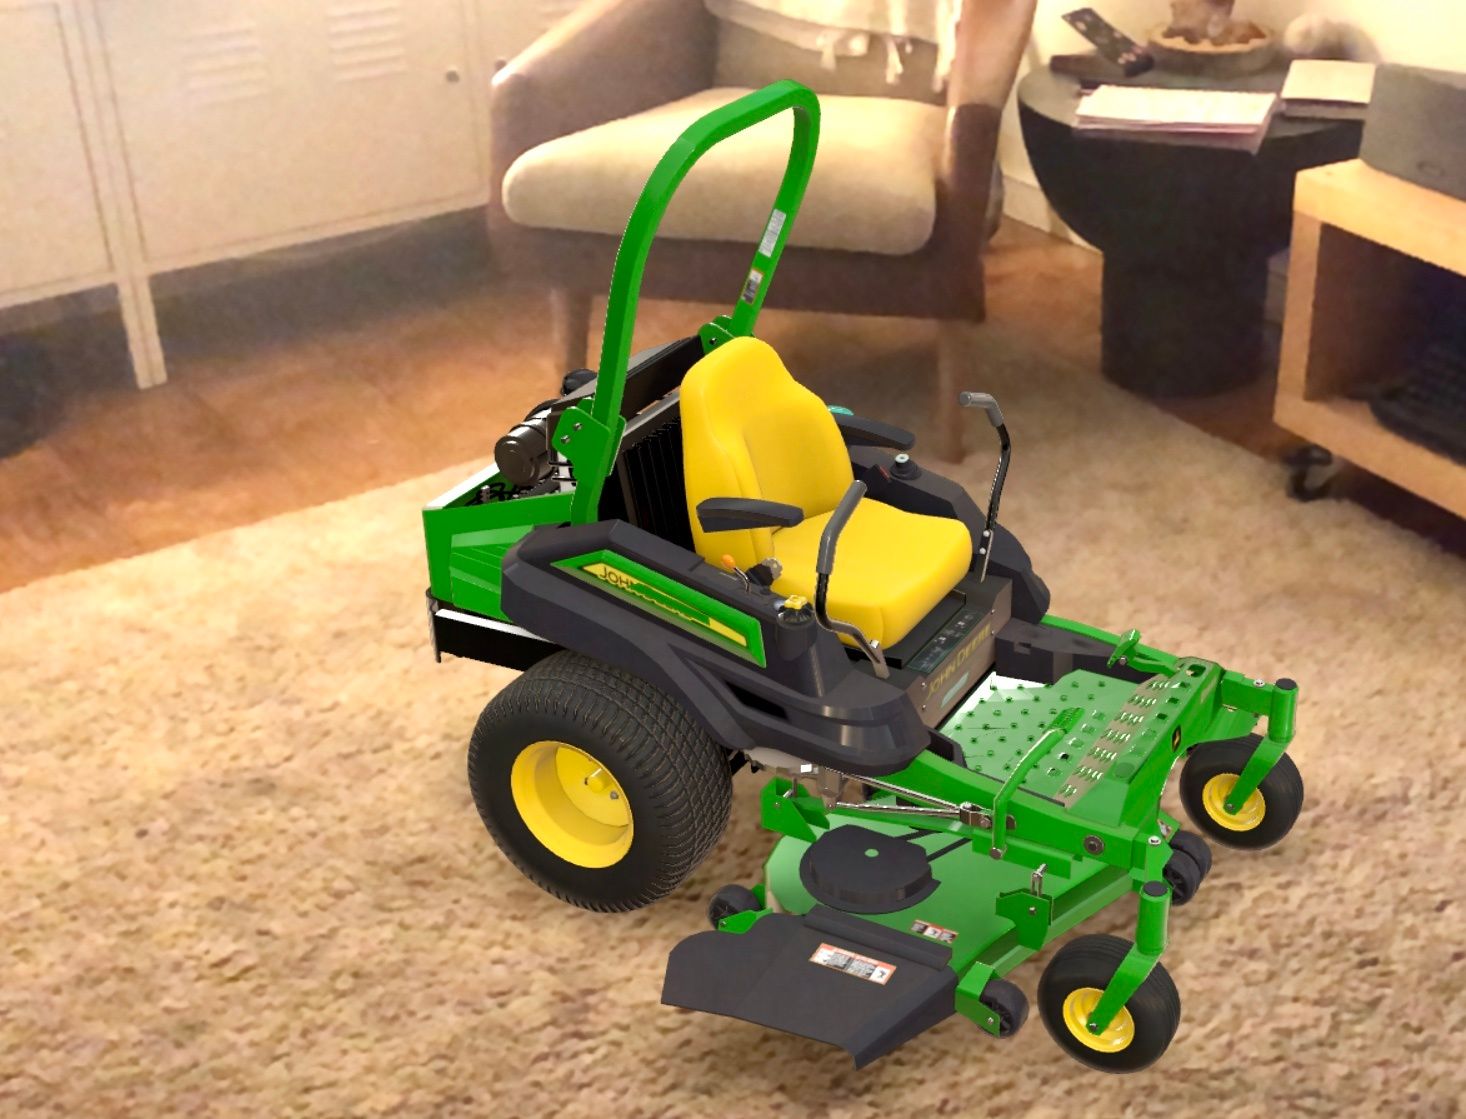 An image of a green and yellow John Deere lawn mower  in the middle of a living room